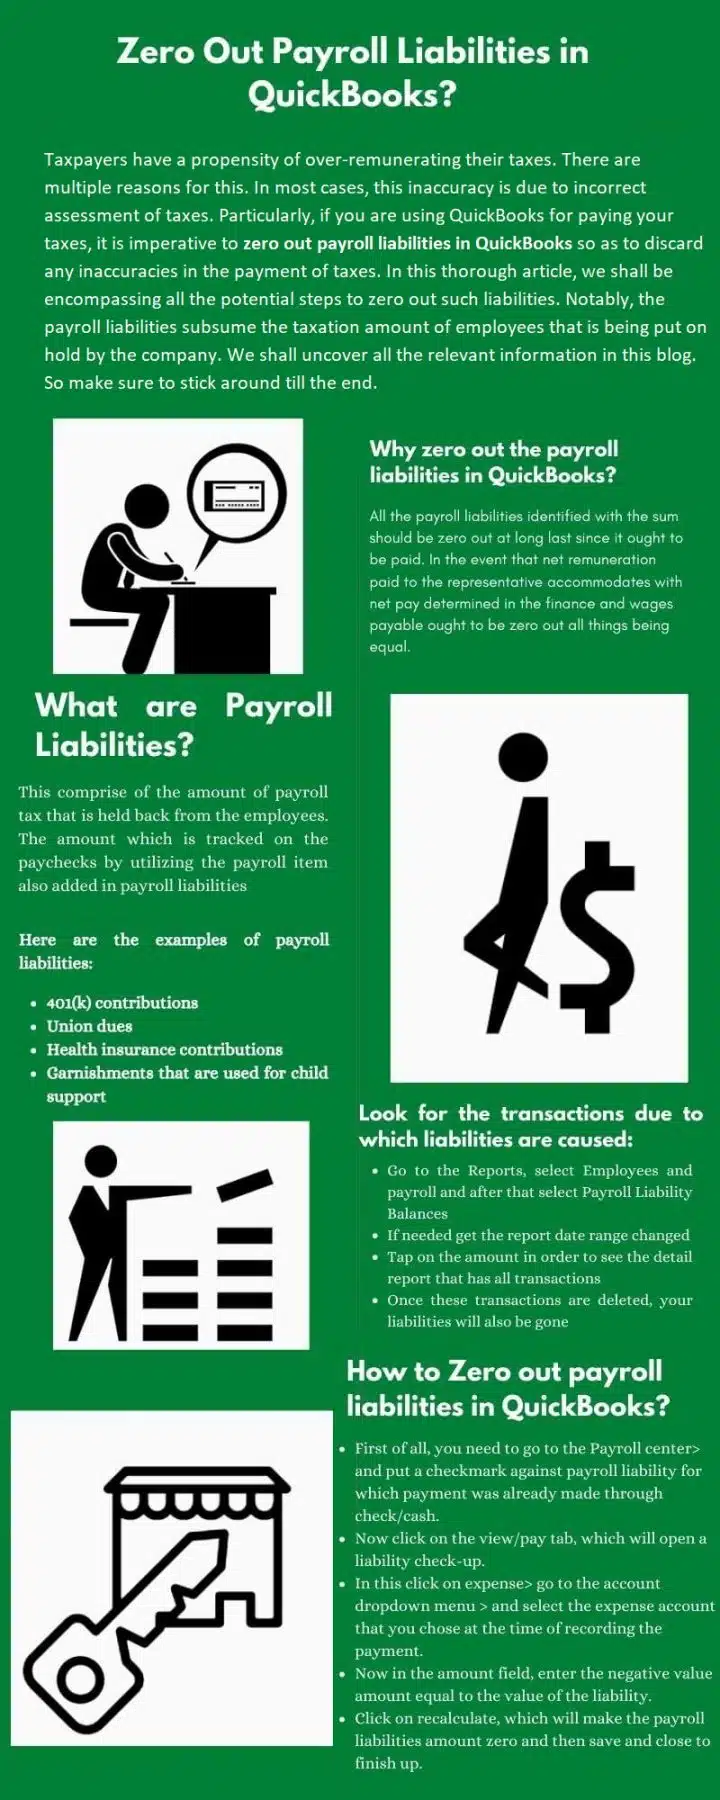 Steps to Zero Out Payroll Liabilities in QuickBooks - Infographic Image